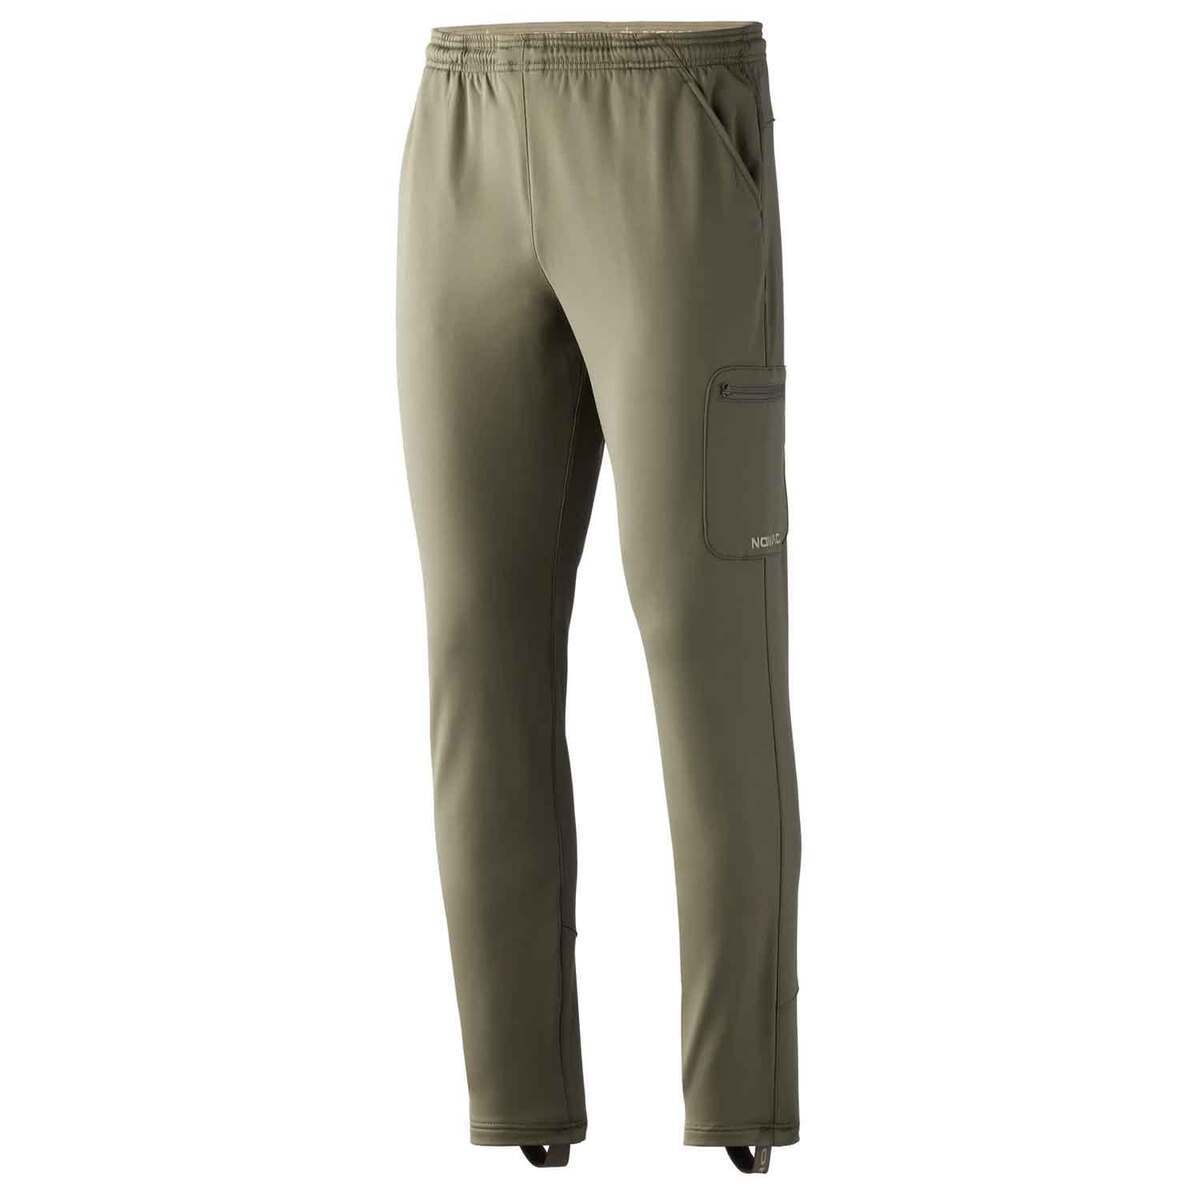 Wader Clearance  Sportsman's Warehouse